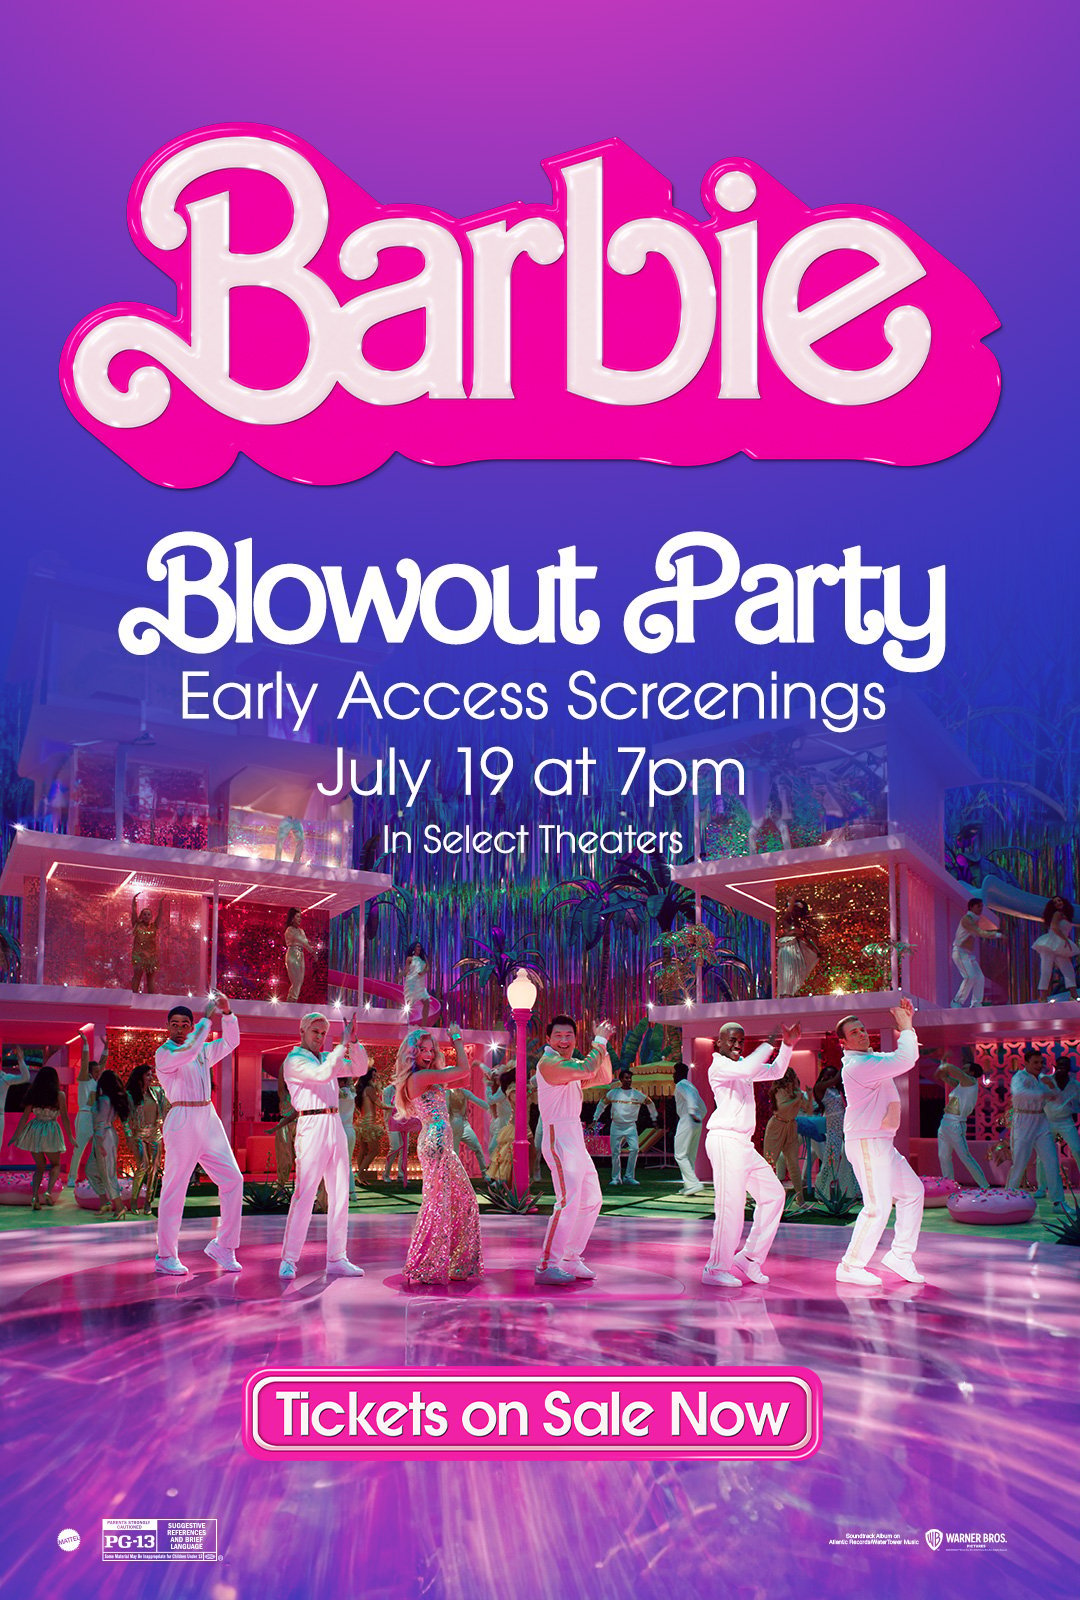 Barbie Blowout Party: Early Access Screenings